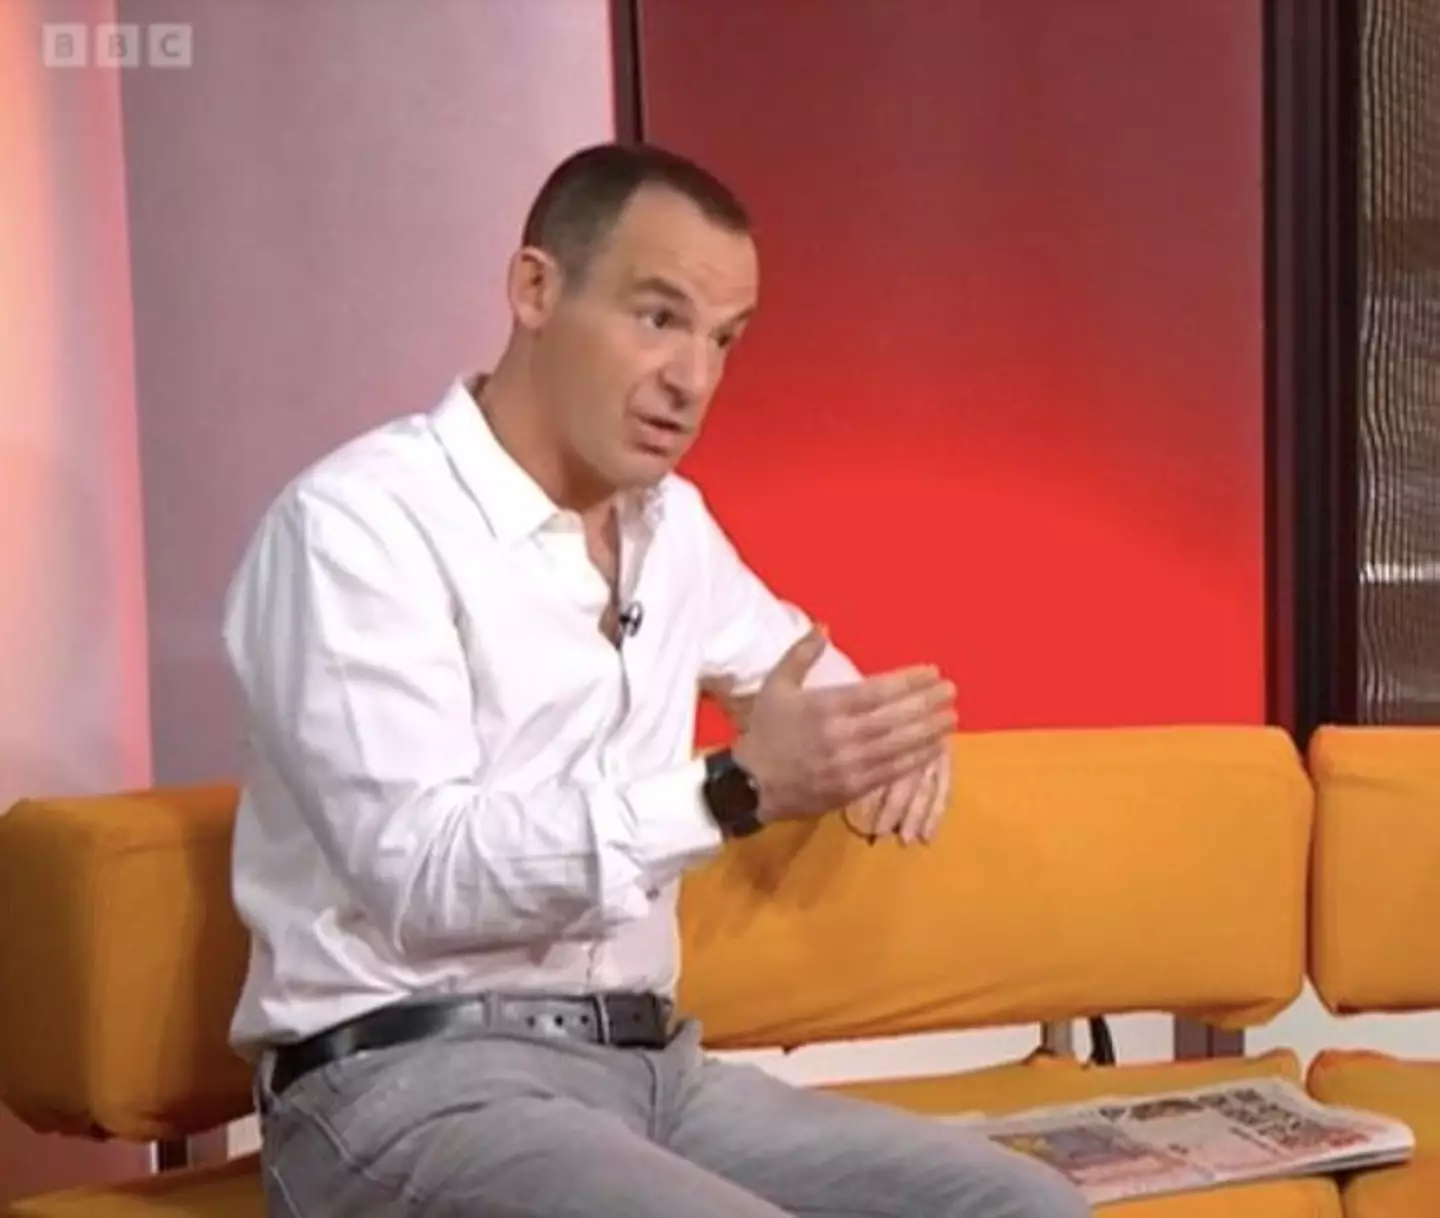 Martin Lewis said there's not much more he can do.